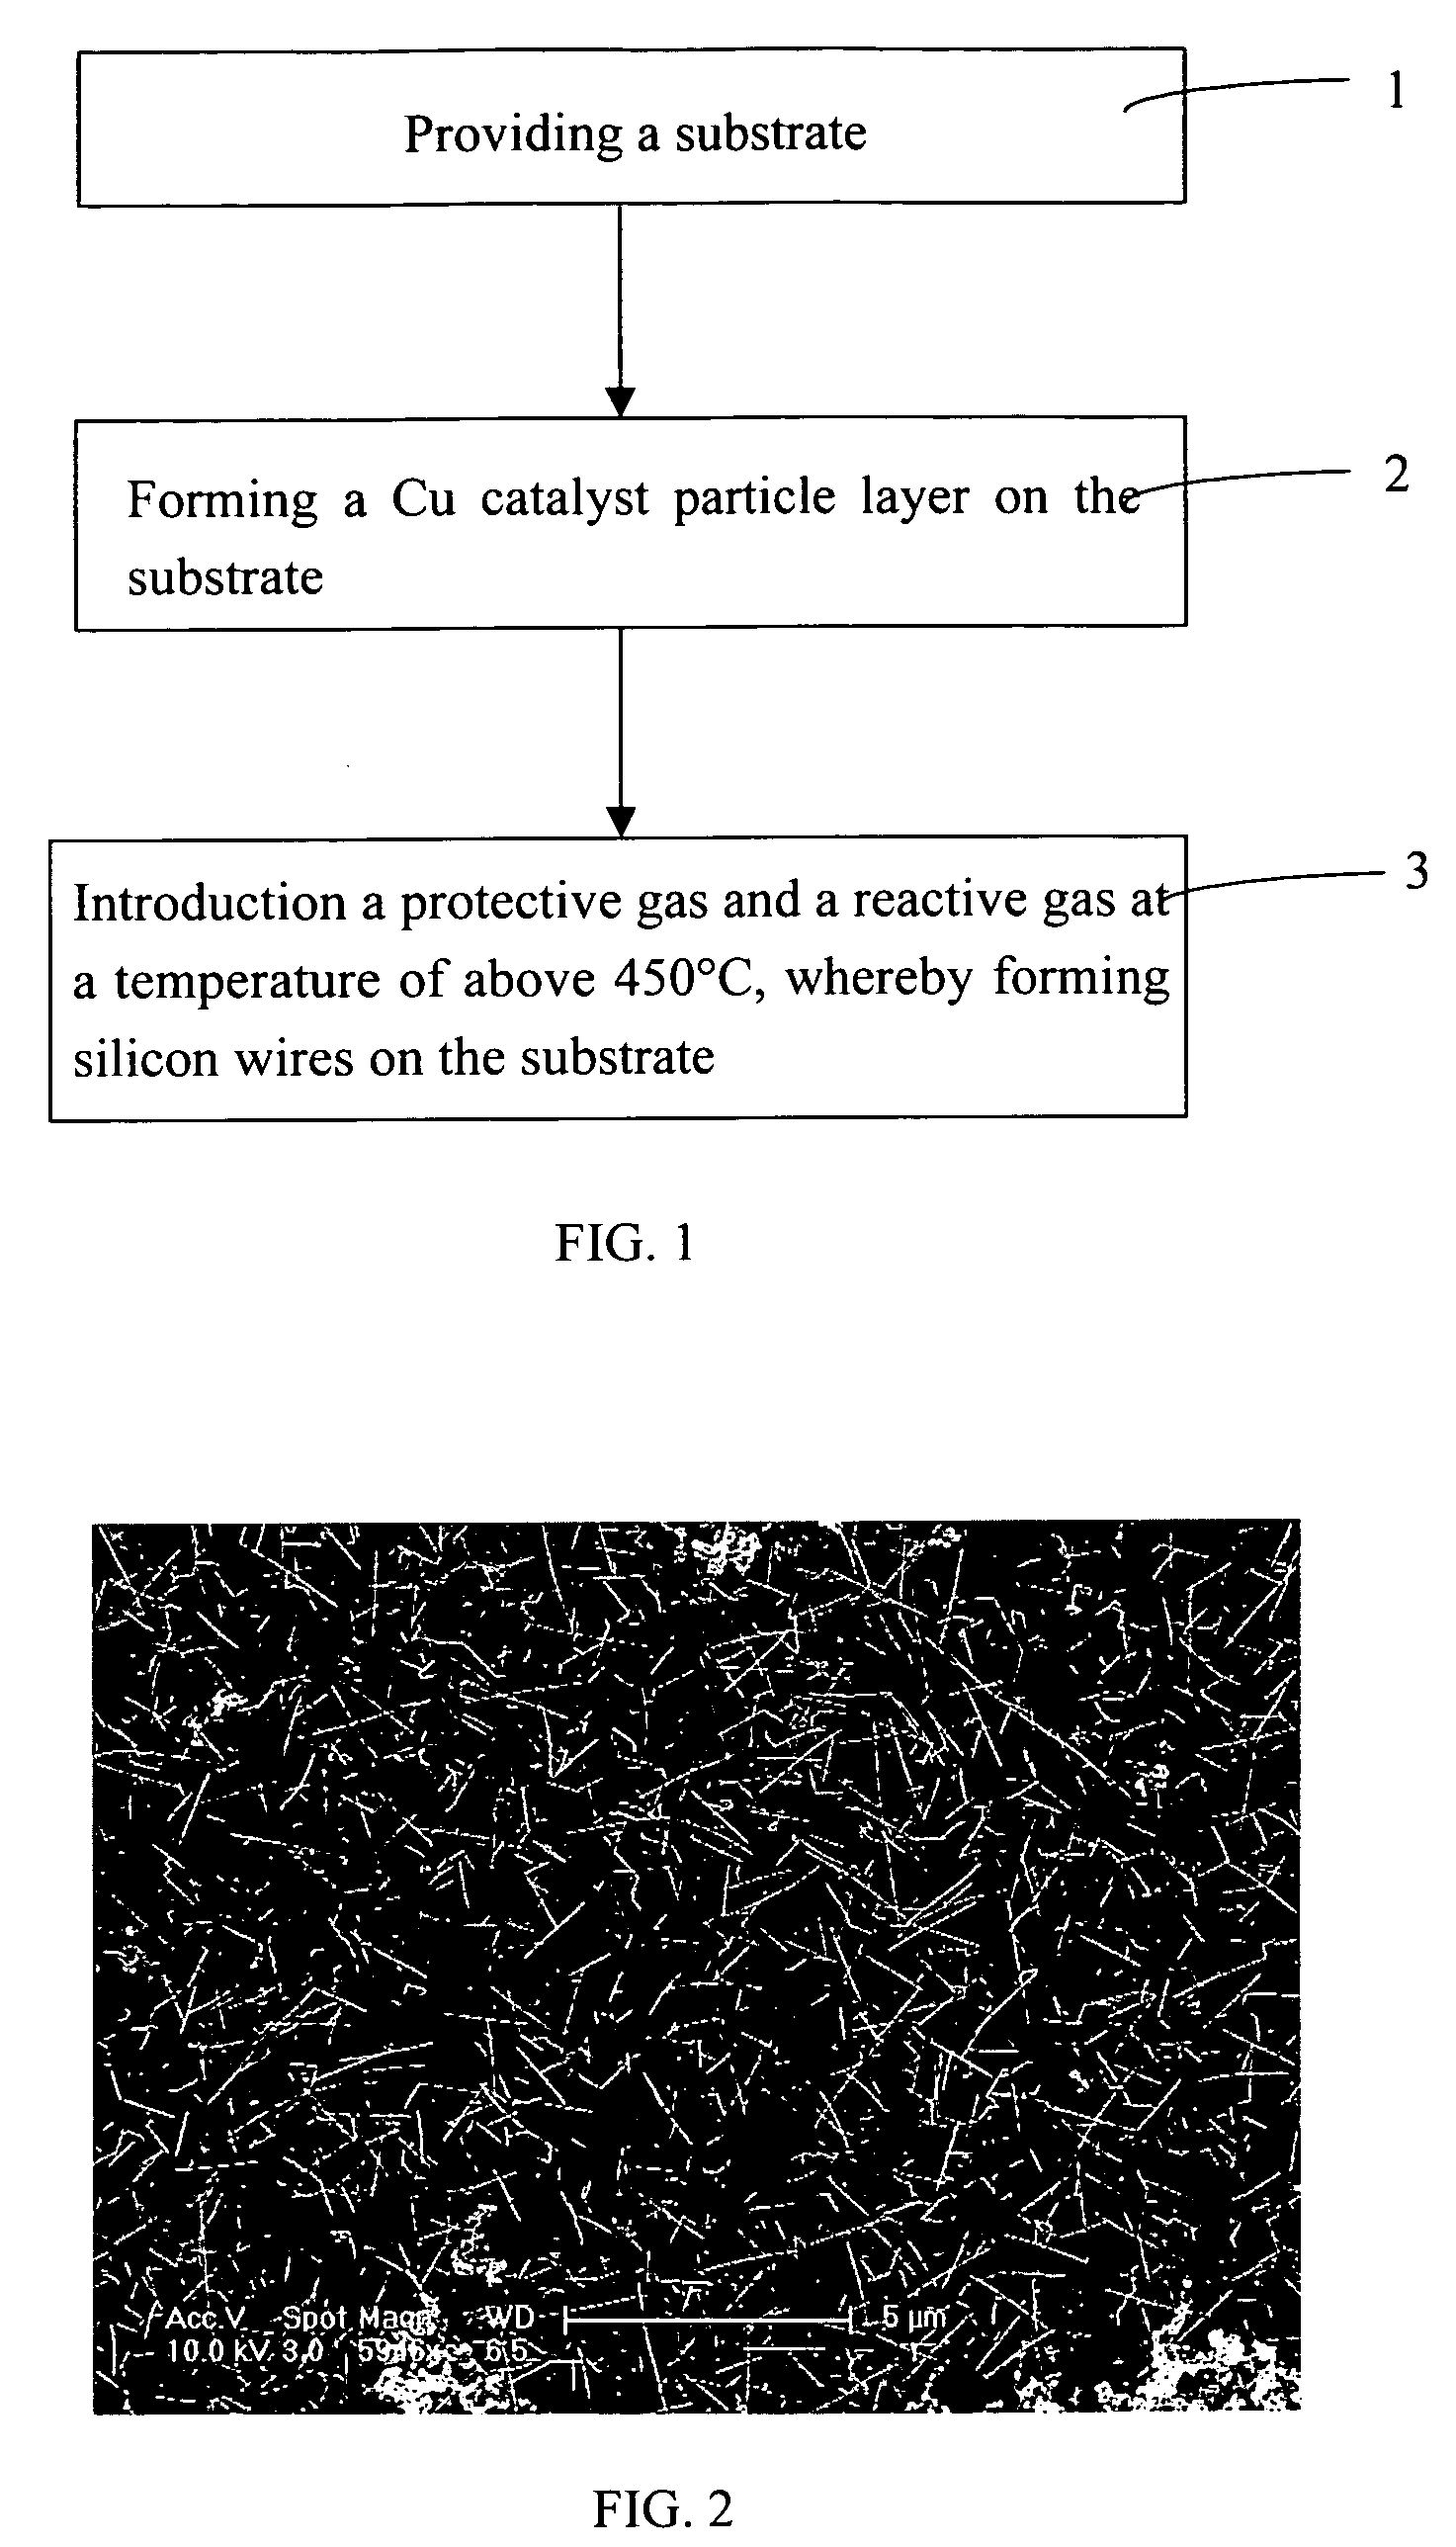 Method of synthesizing silicon wires